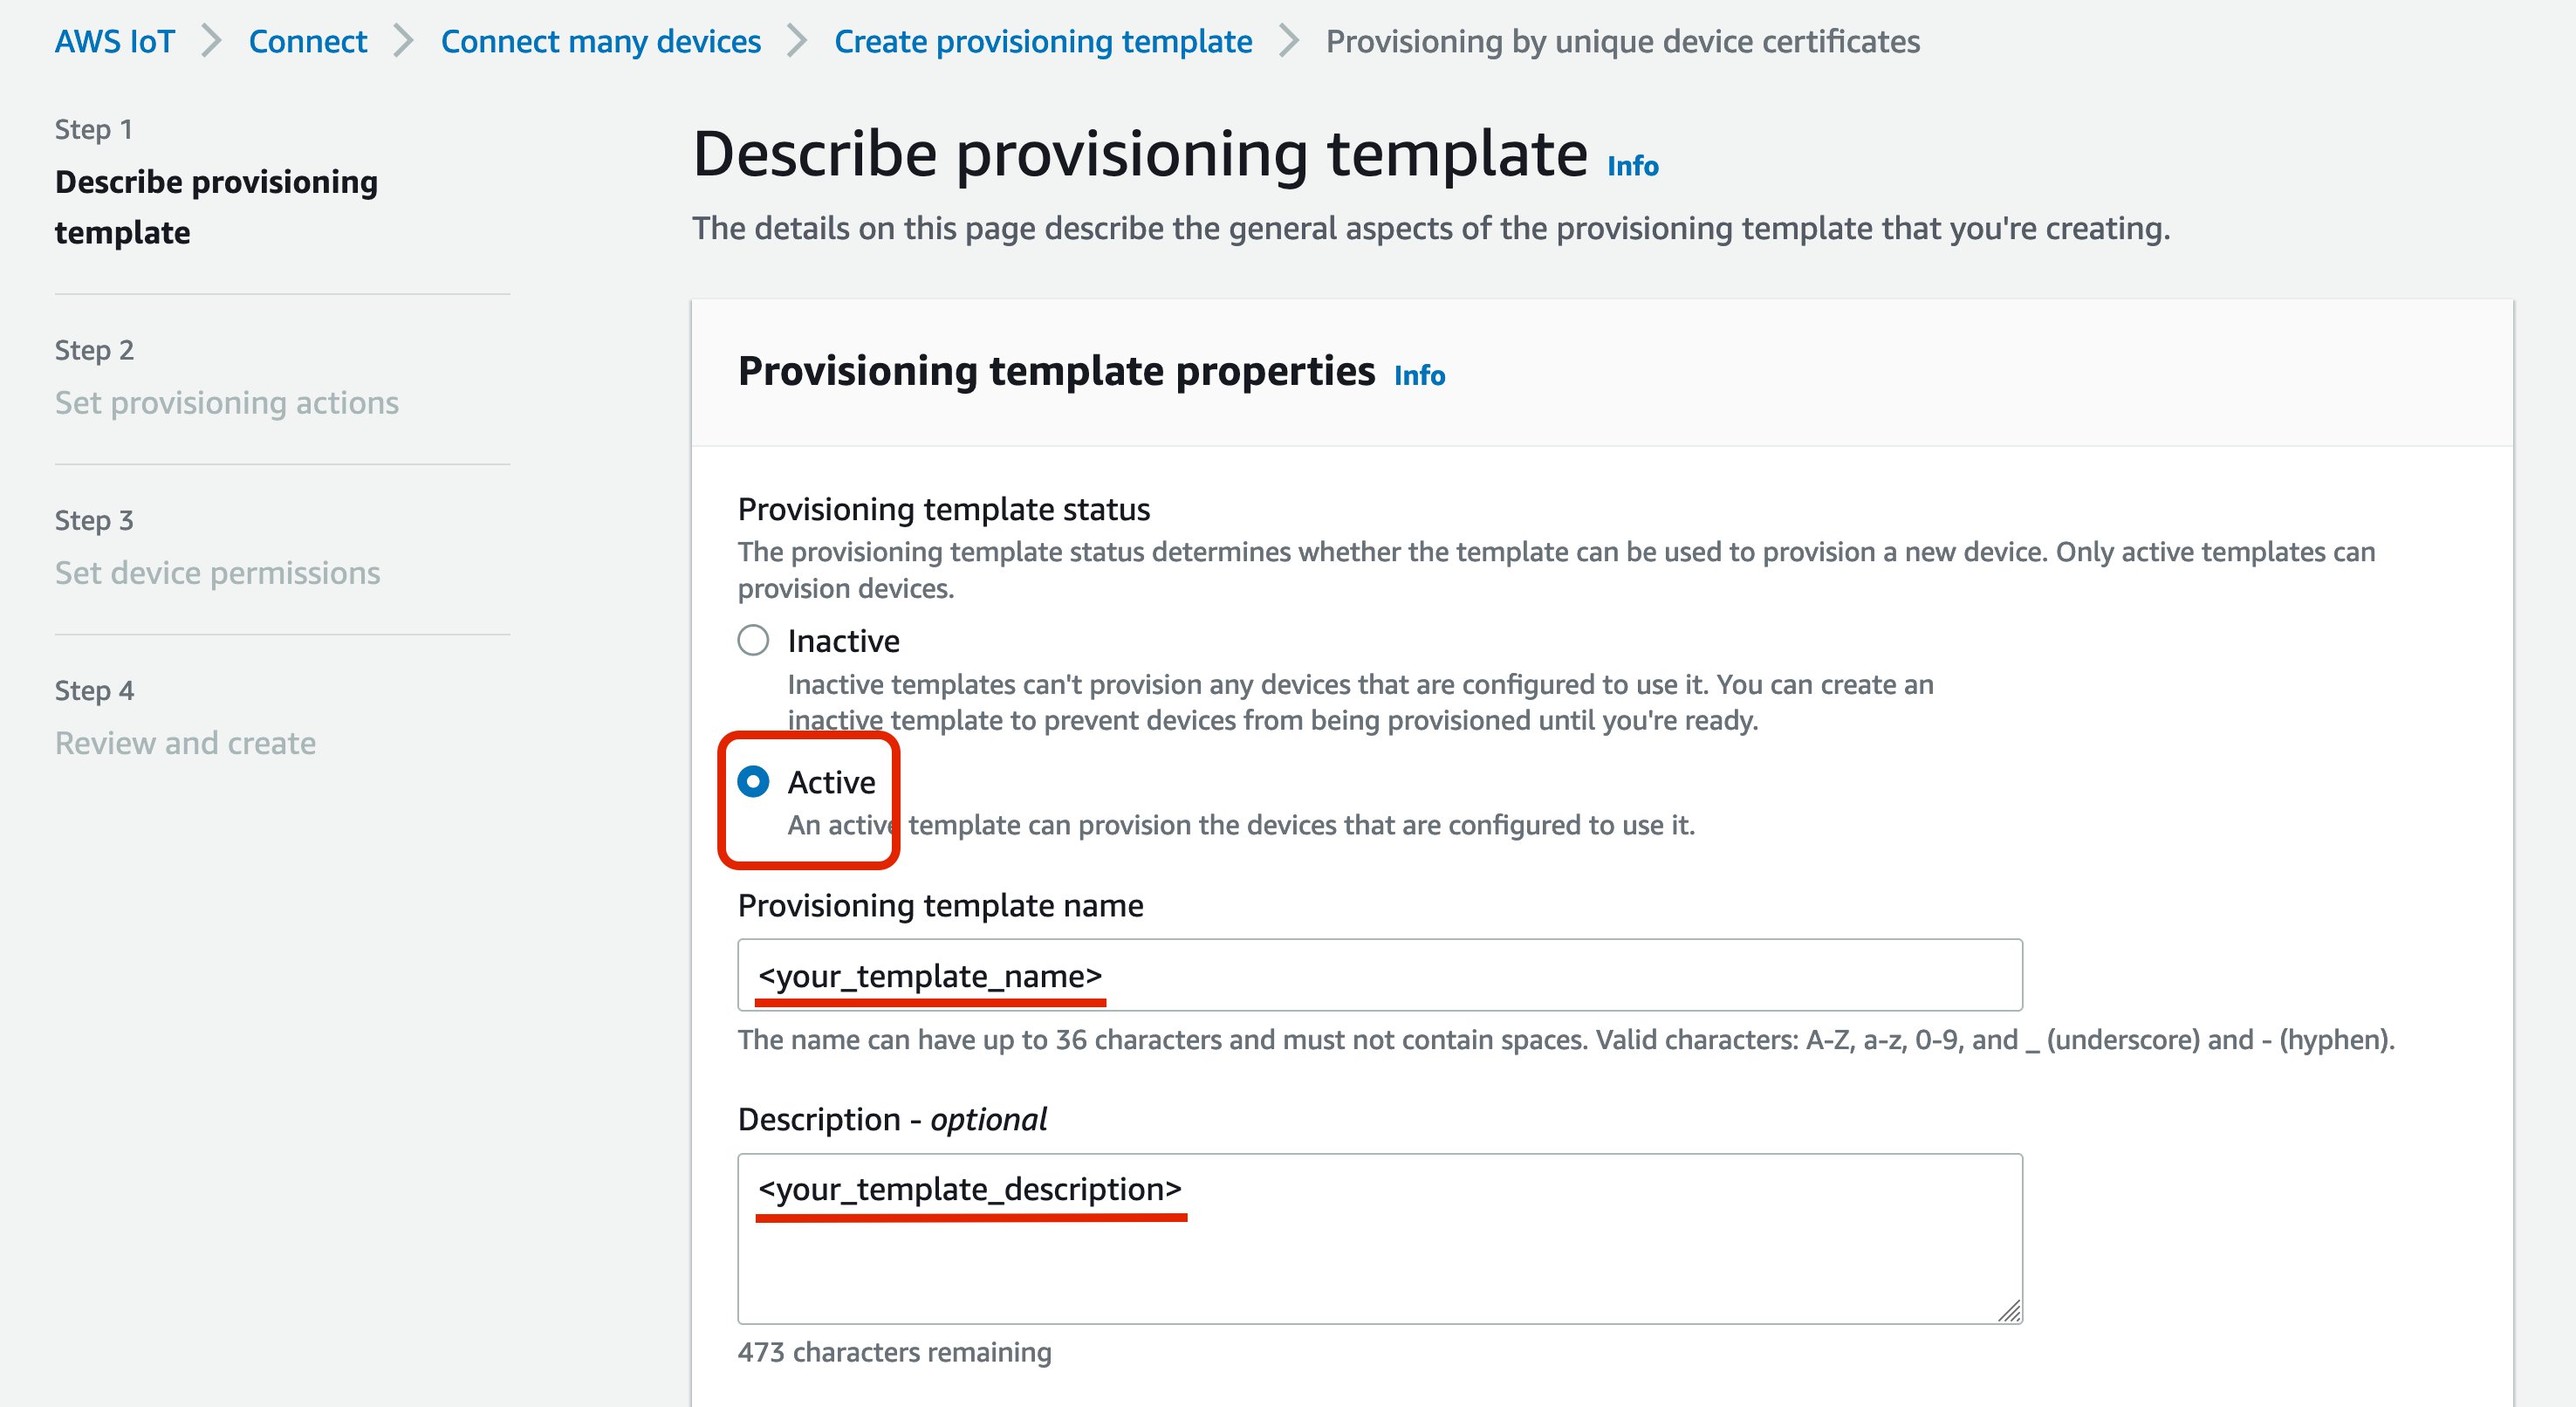 AWS IoT provisioning template configuration screen with options to set template status as active or inactive, specify template name, and provide an optional description.